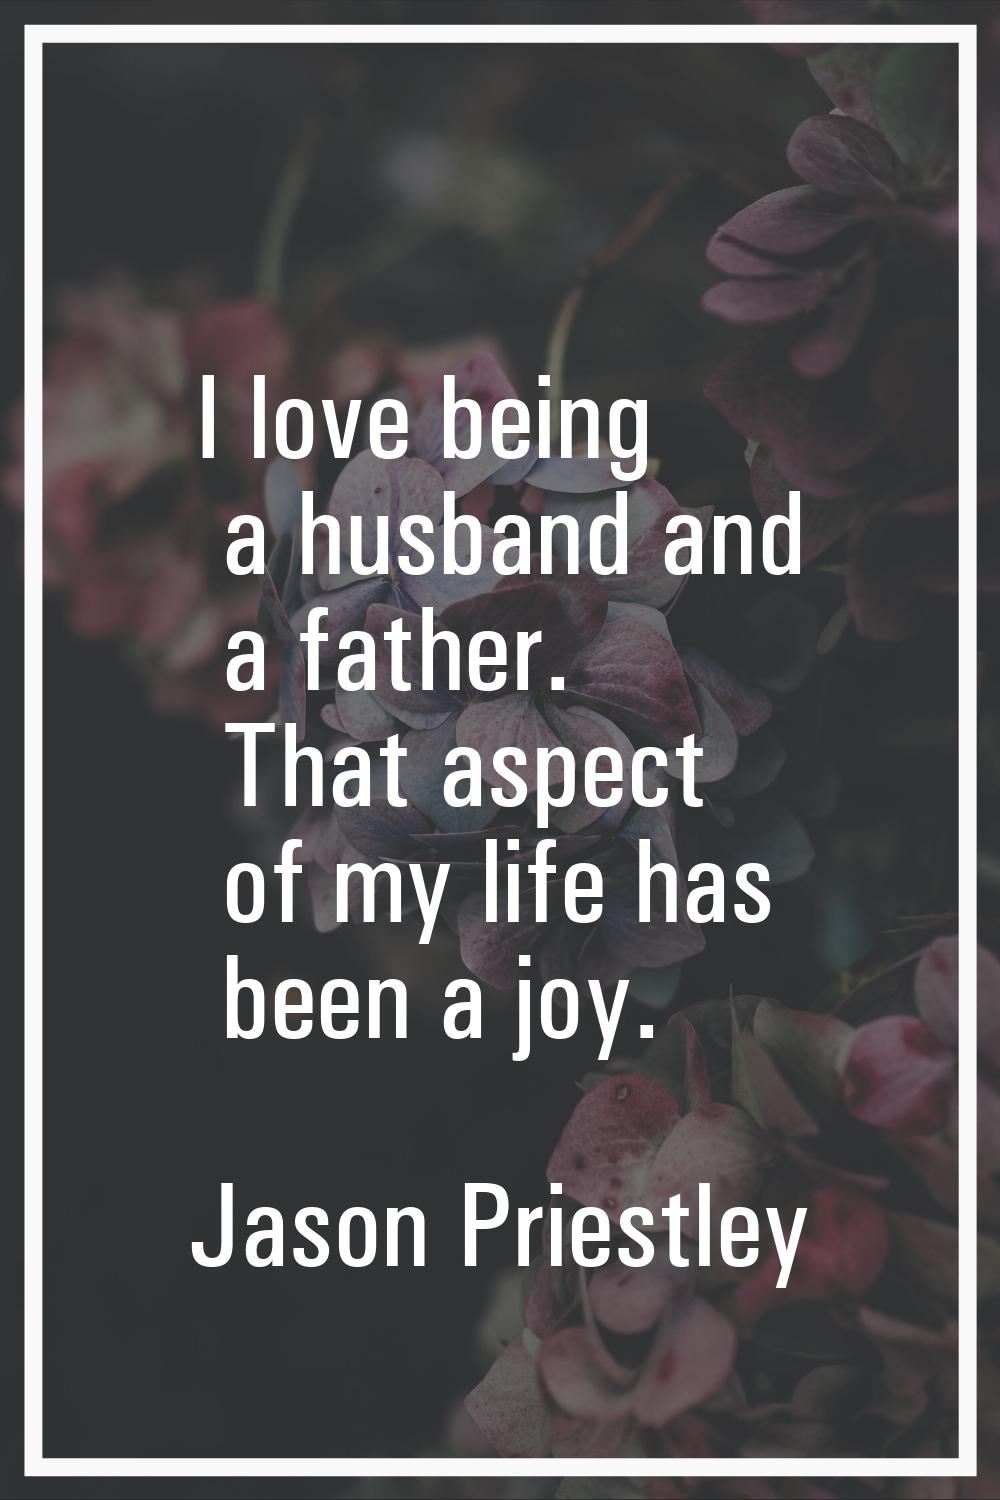 I love being a husband and a father. That aspect of my life has been a joy.